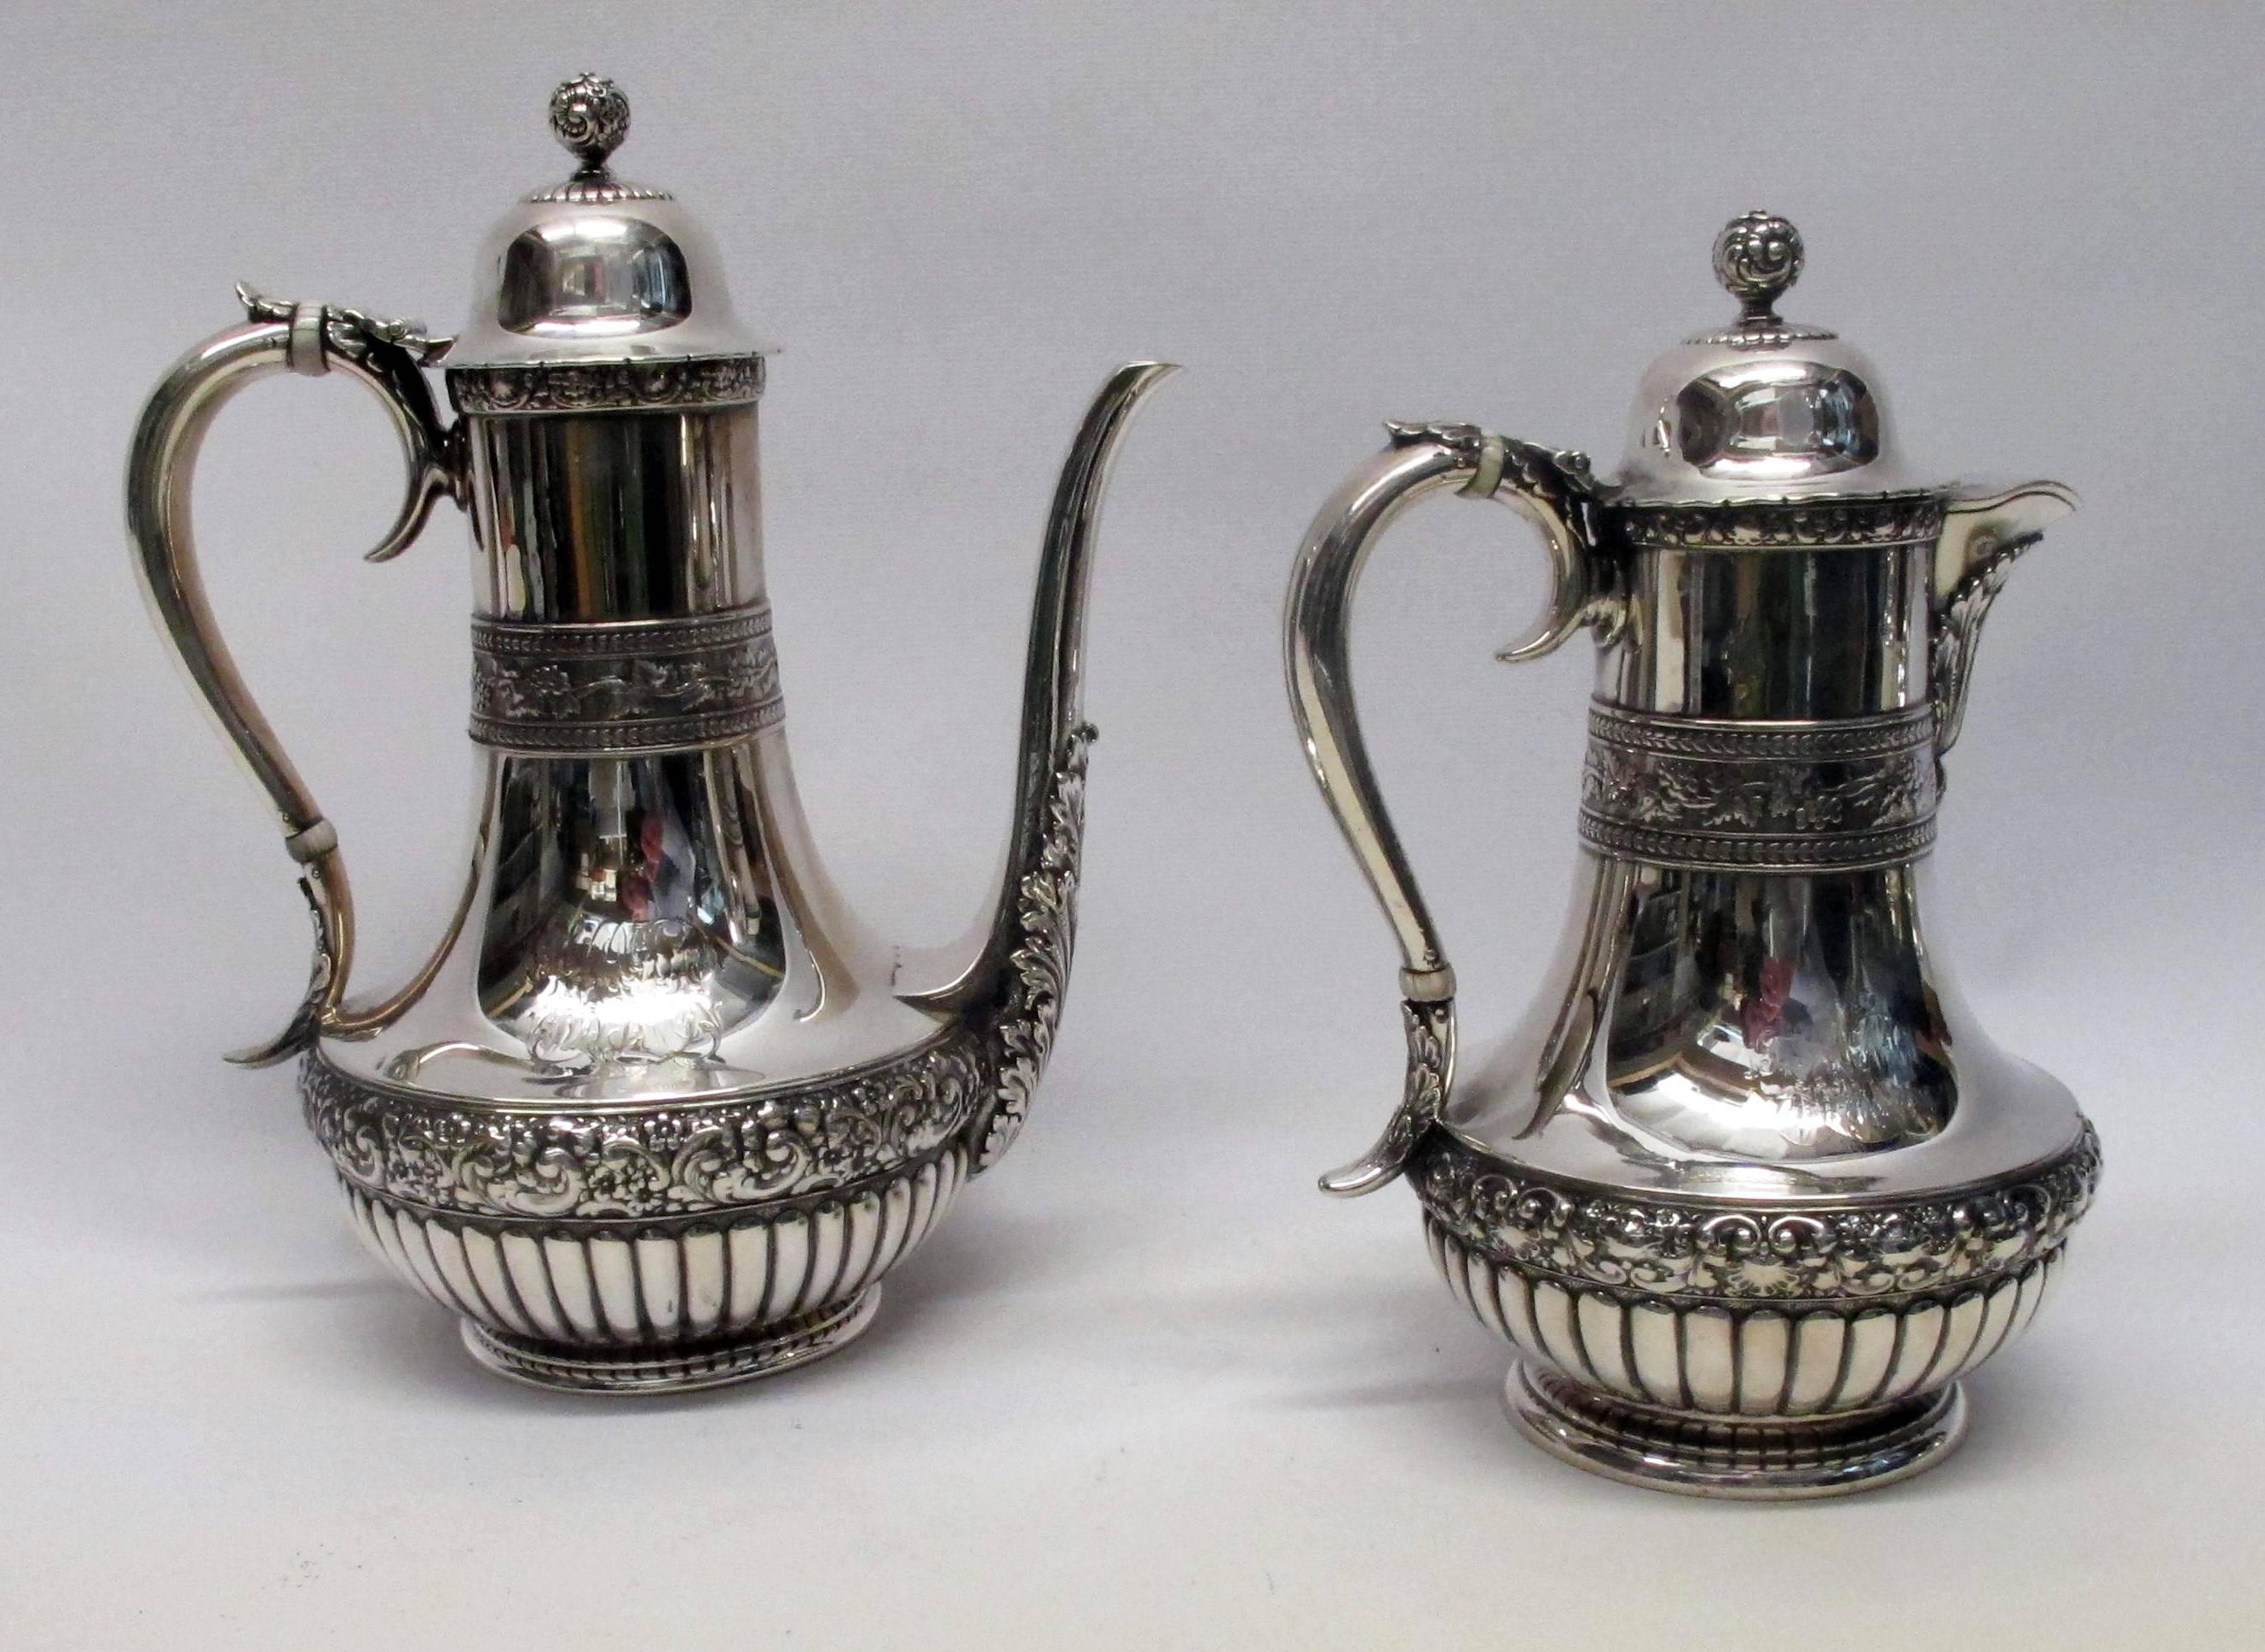 Tiffany & Co. Sterling Silver Six-Piece Tea and Coffee Service, circa 1870 In Excellent Condition For Sale In Santa Fe, NM